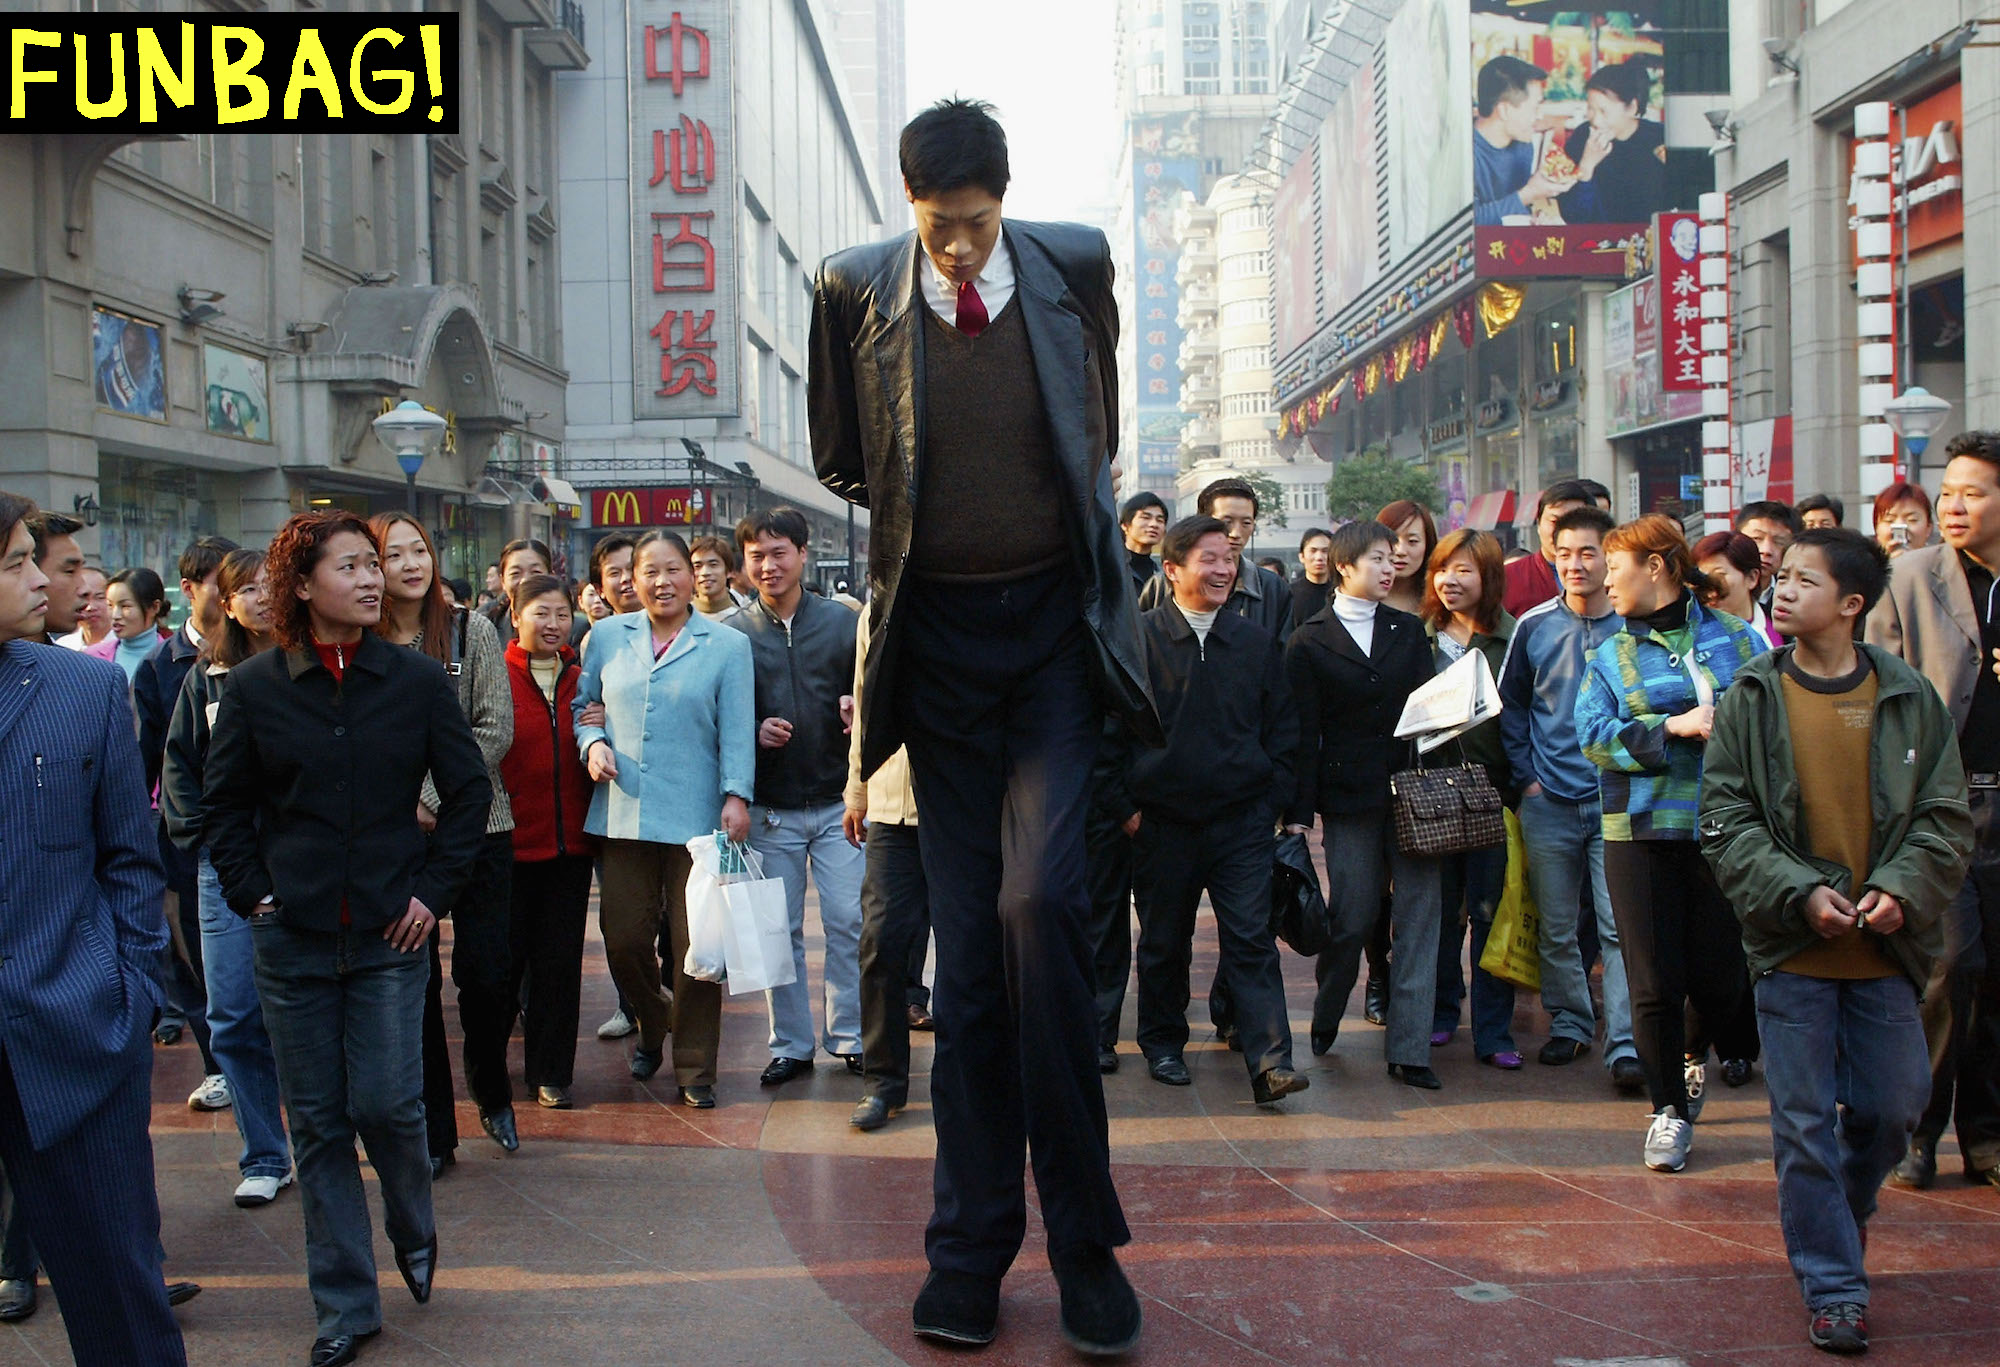 WUHAN, CHINA - NOVEMBER 23: (CHINA OUT) Zhang Juncai, one of China's tallest men, who measures 2.42 metres in height, walks through the streets on November 23, 2004 in Wuhan, China. Zhang, from Shanxi province, is in Wuhan to seek treatment for his overweight problem. (Photo by China Pix/Getty Images) *** Local Caption *** Zhang Juncai